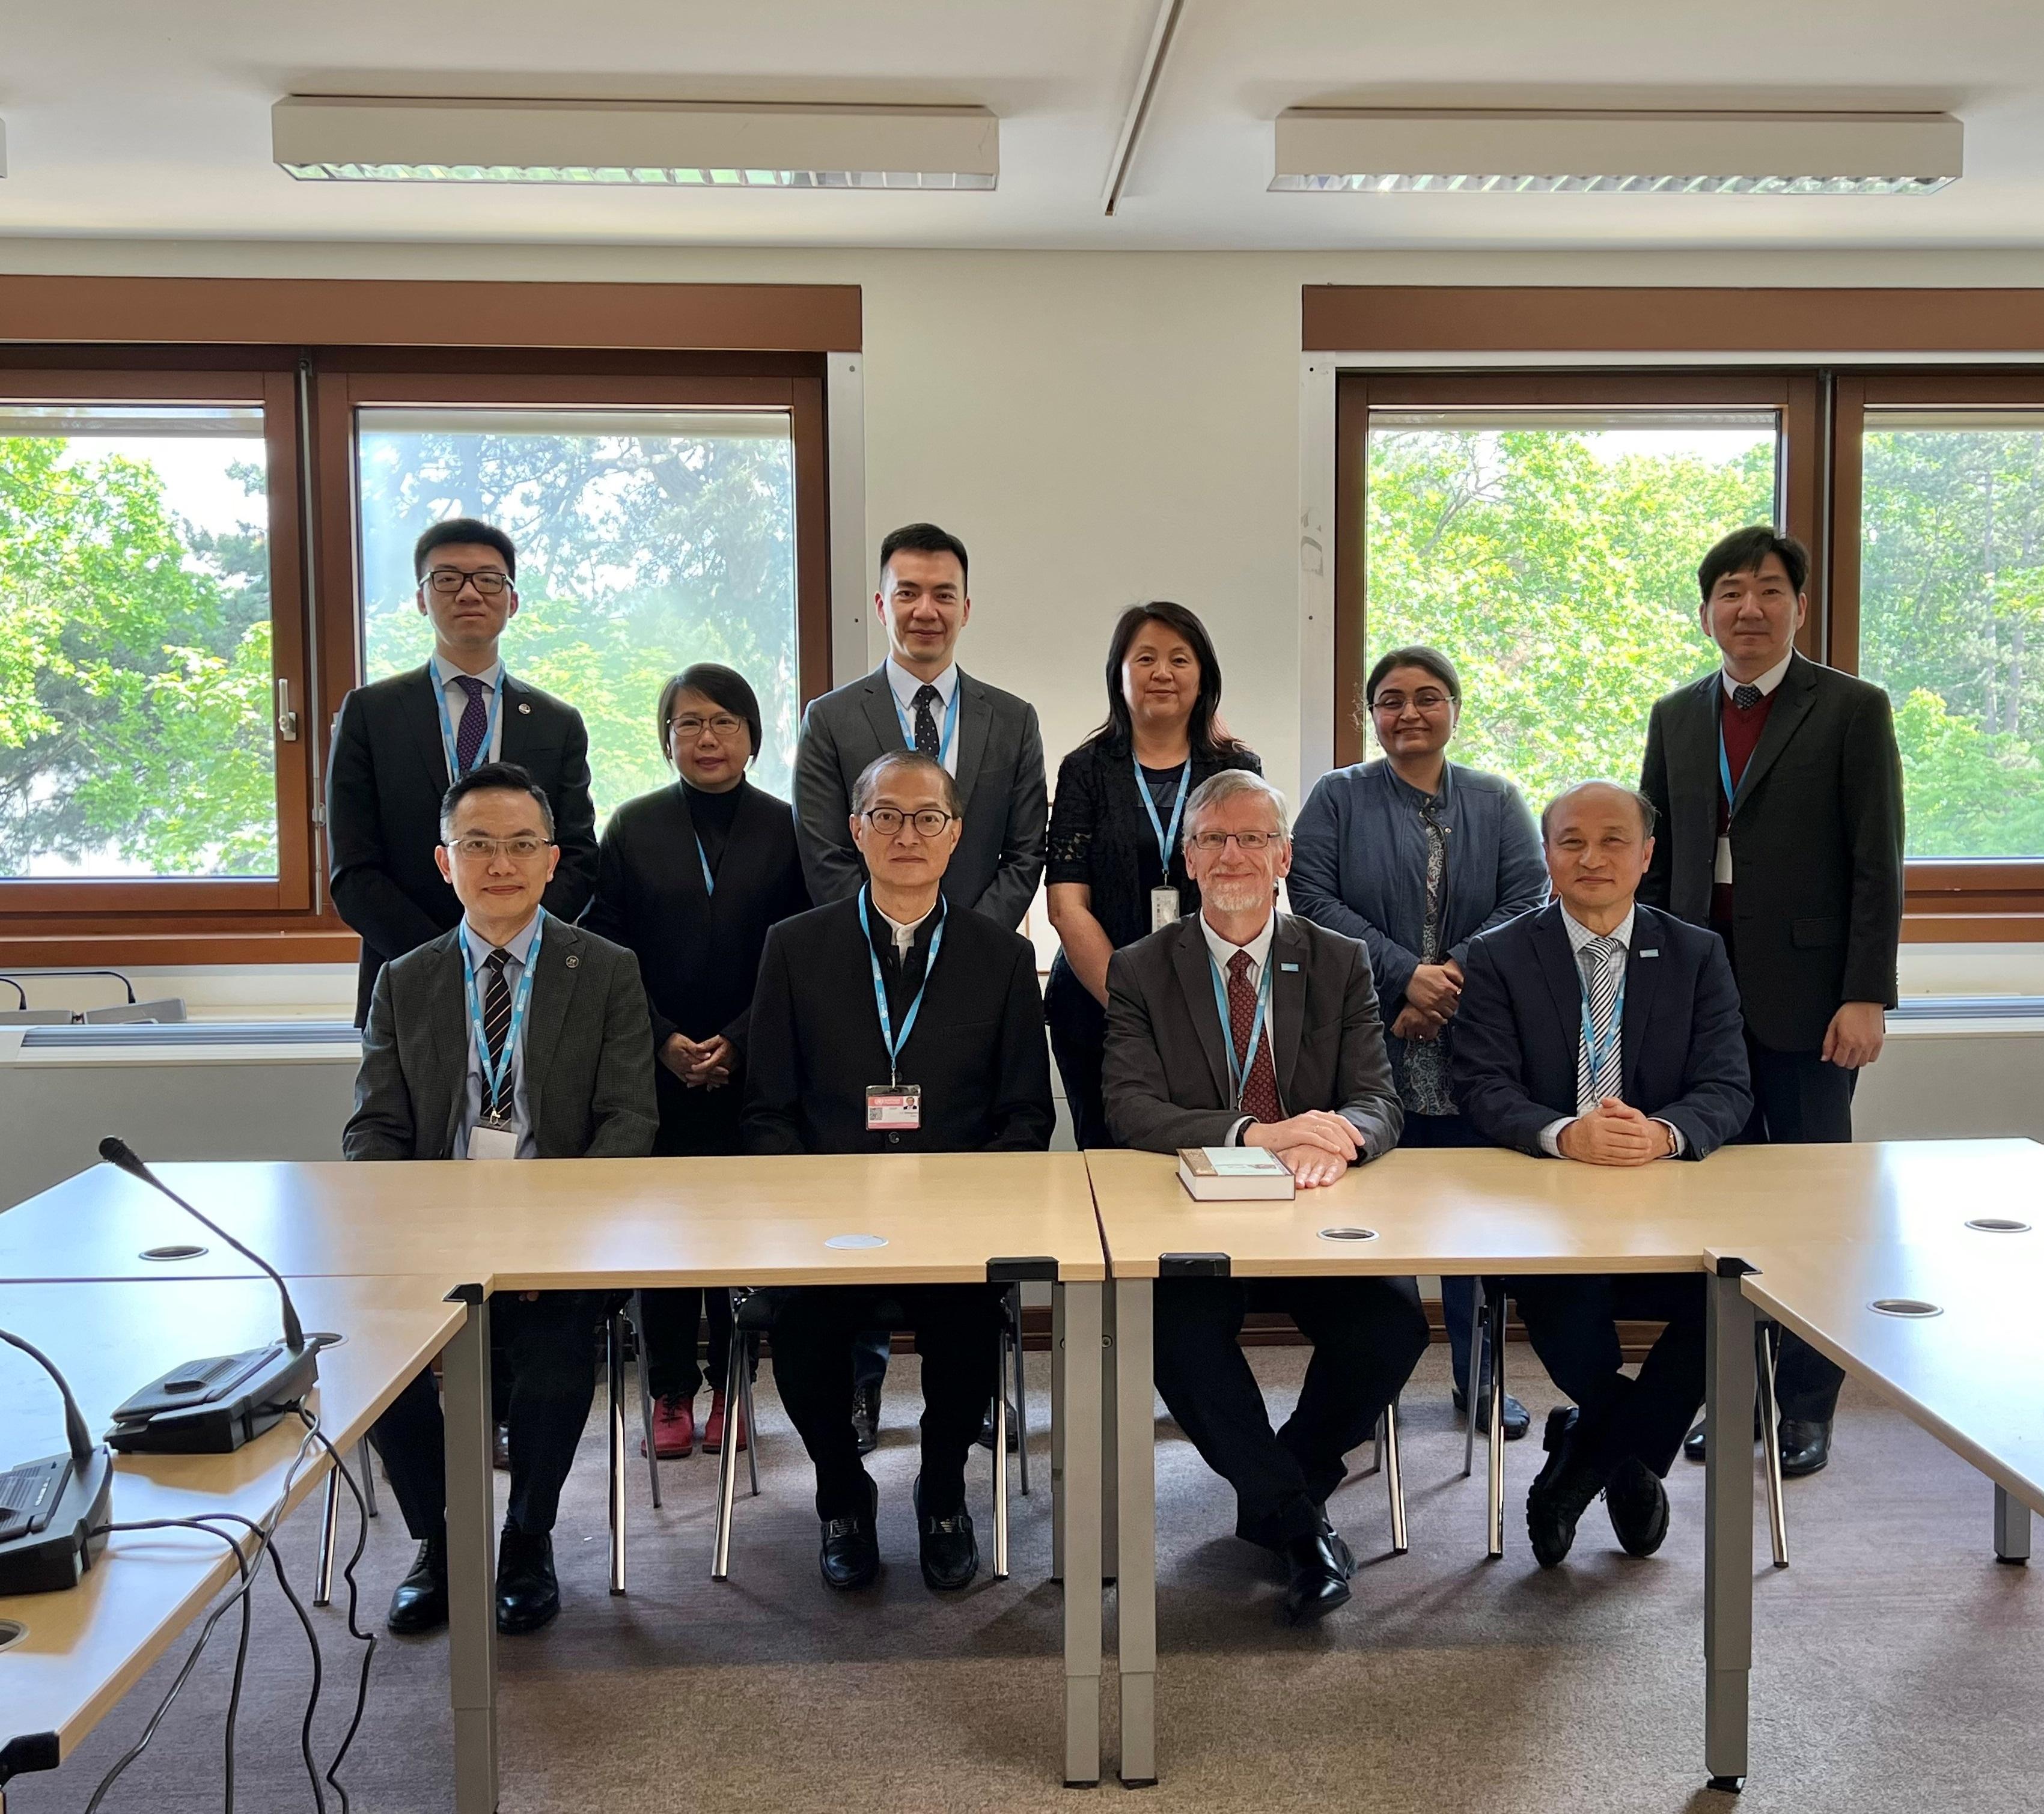 The Secretary for Health, Professor Lo Chung-mau (front row, second left), meets with the Director of the Integrated Health Service Department of the World Health Organization (WHO), Dr Rudi Eggers (front row, second right), and the Head of Traditional, Complementary and Integrative Medicine Unit of the WHO, Dr Kim Sungchol (front row, first right), in Geneva, Switzerland on May 22 (Geneva time). Professor Lo introduces to them the Hong Kong Special Administrative Government’s multi-pronged efforts in promoting the development of Chinese medicine in Hong Kong. Also attending the meeting is the Director of Health, Dr Ronald Lam (front row, first left).